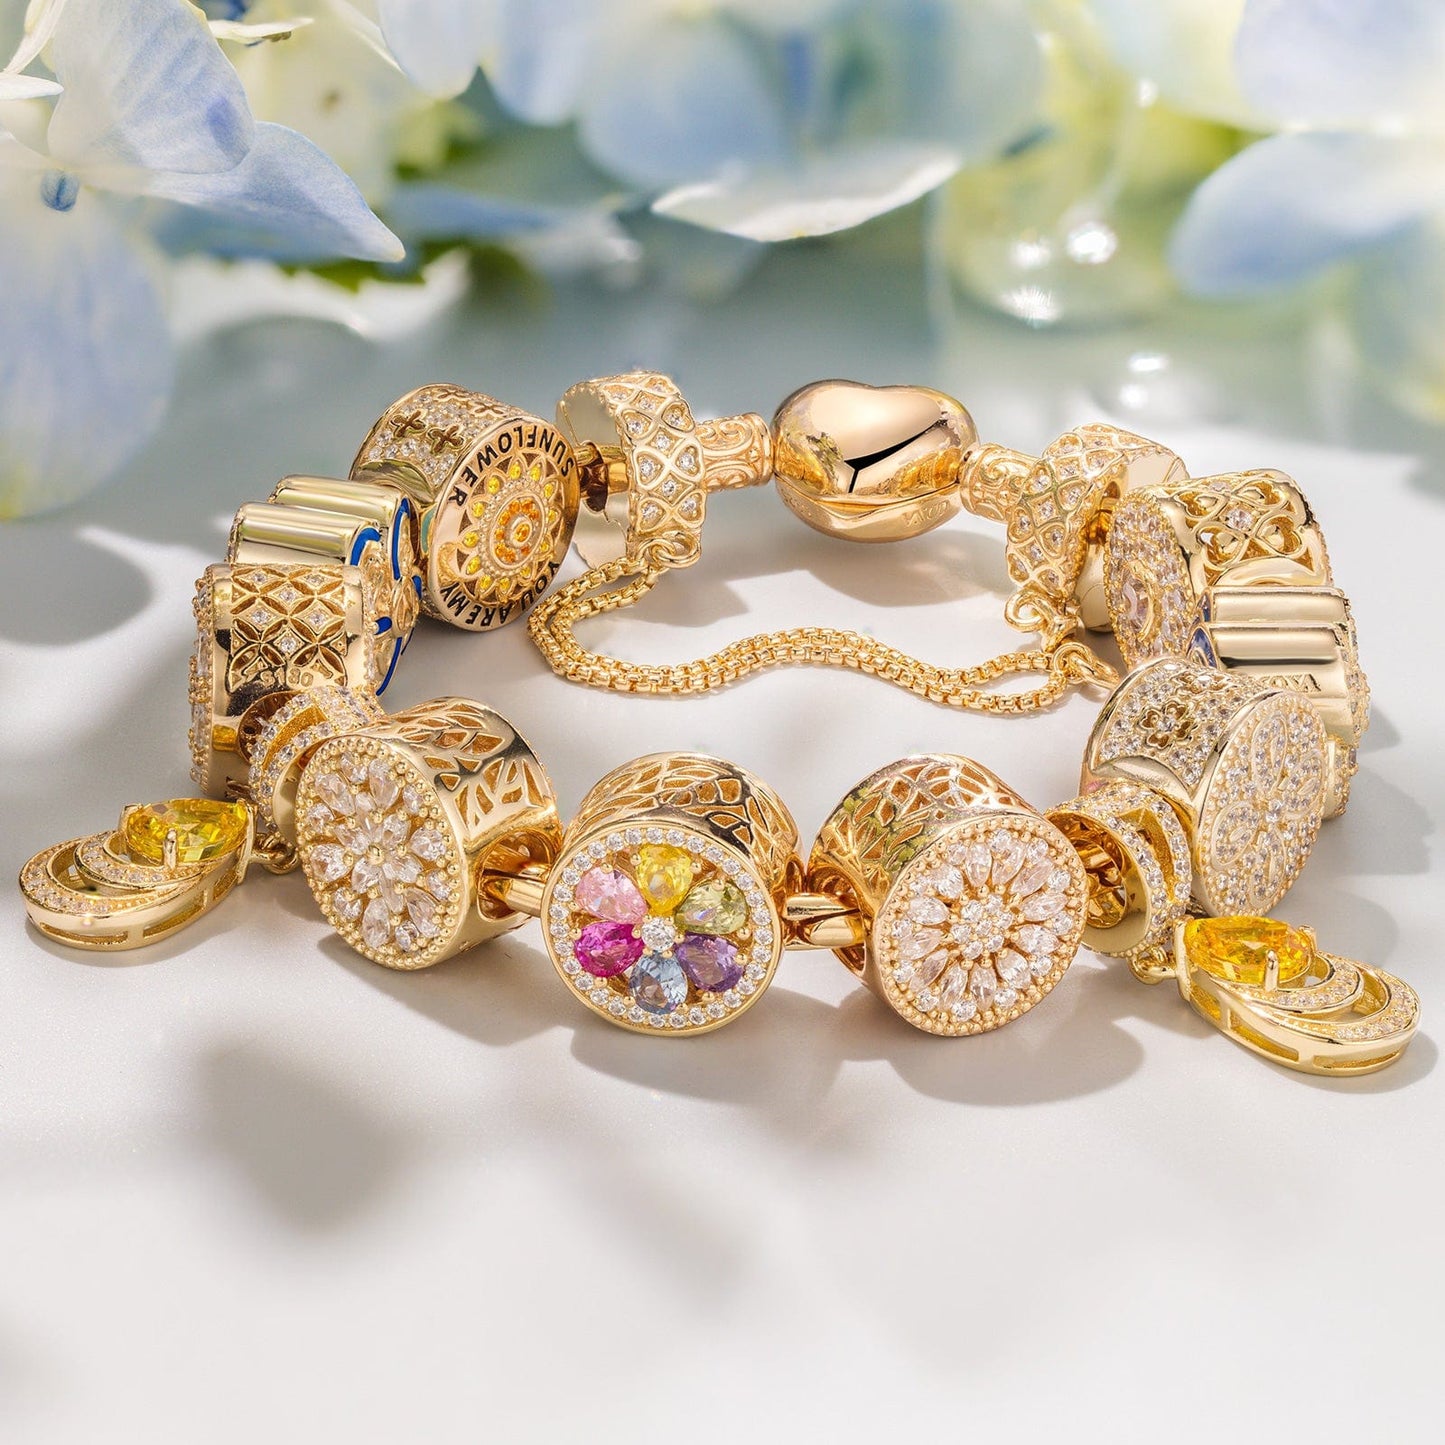 Sterling Silver Blooming Petals of Love Charms Bracelet Set In 14K Gold Plated